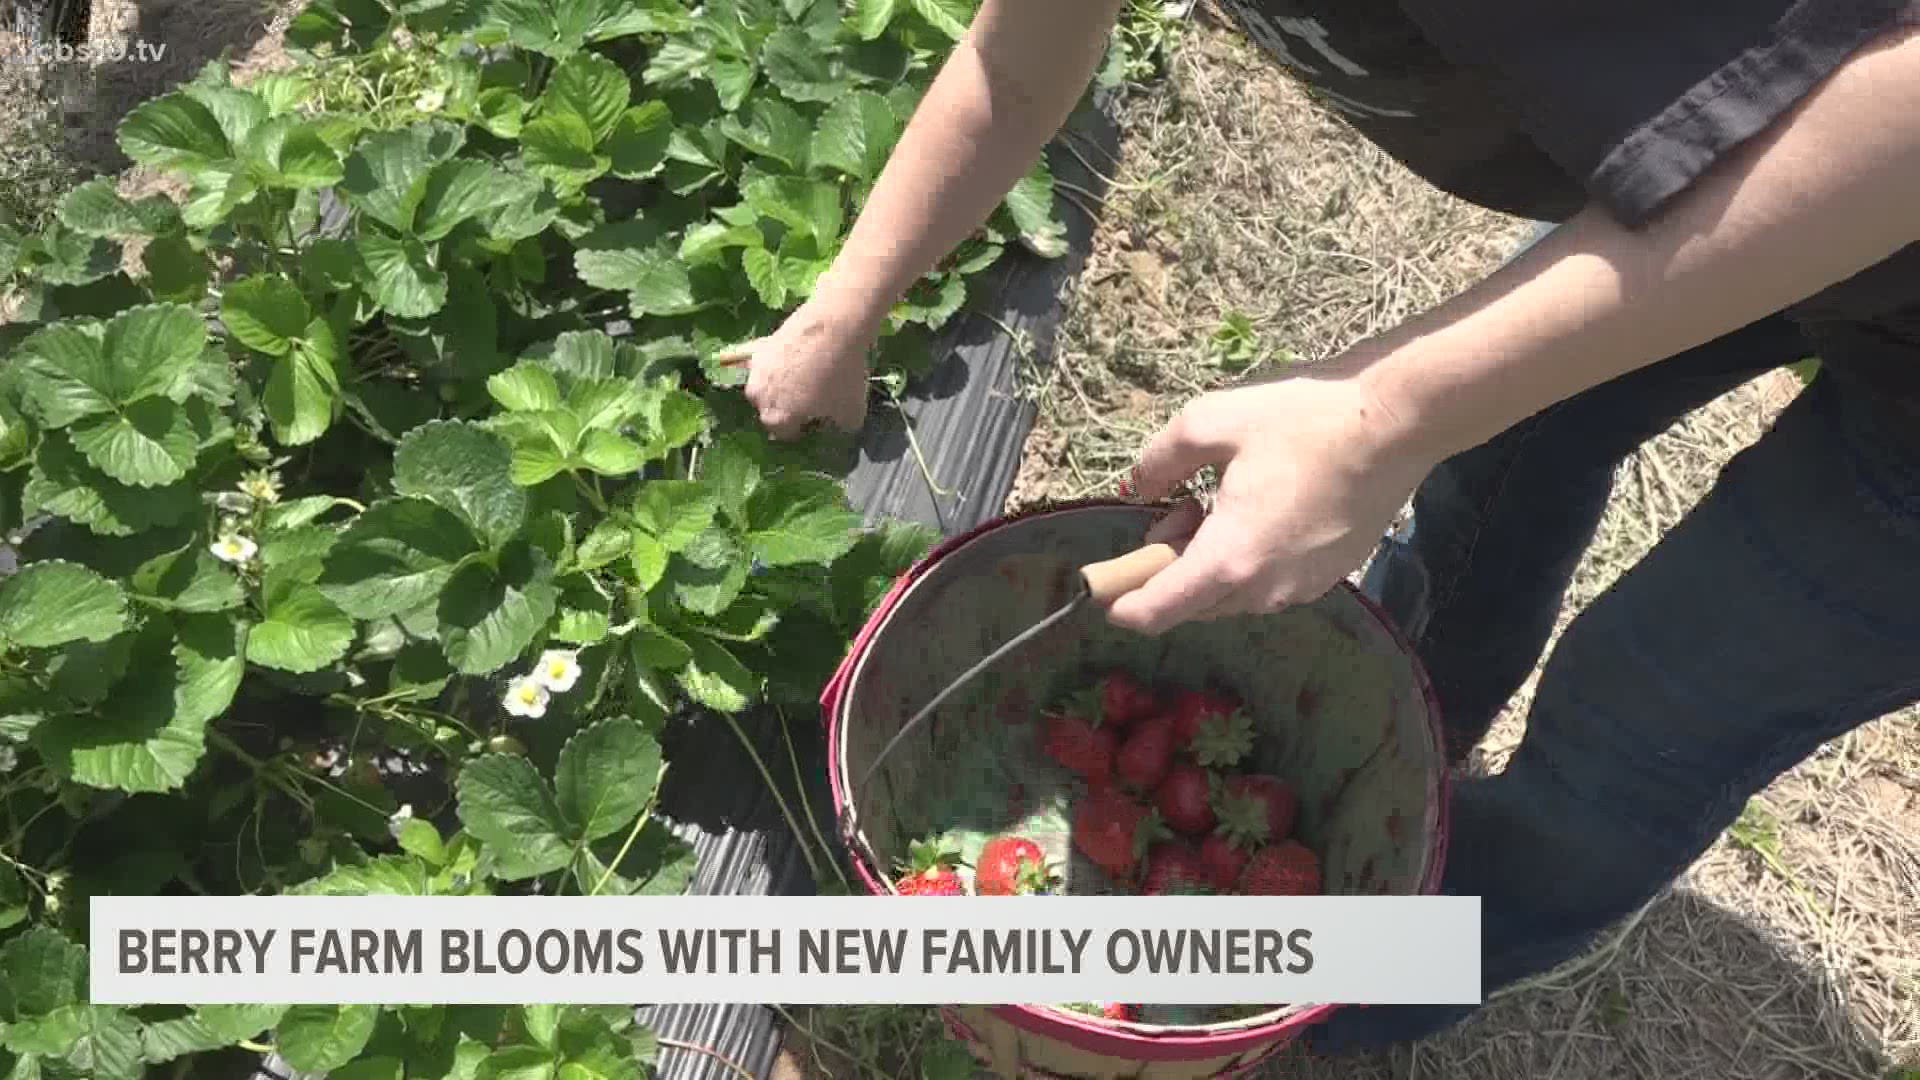 The Tyler Berry Farm has been around since 1984 and has recently been passed down to a new generation bringing new berries to pick